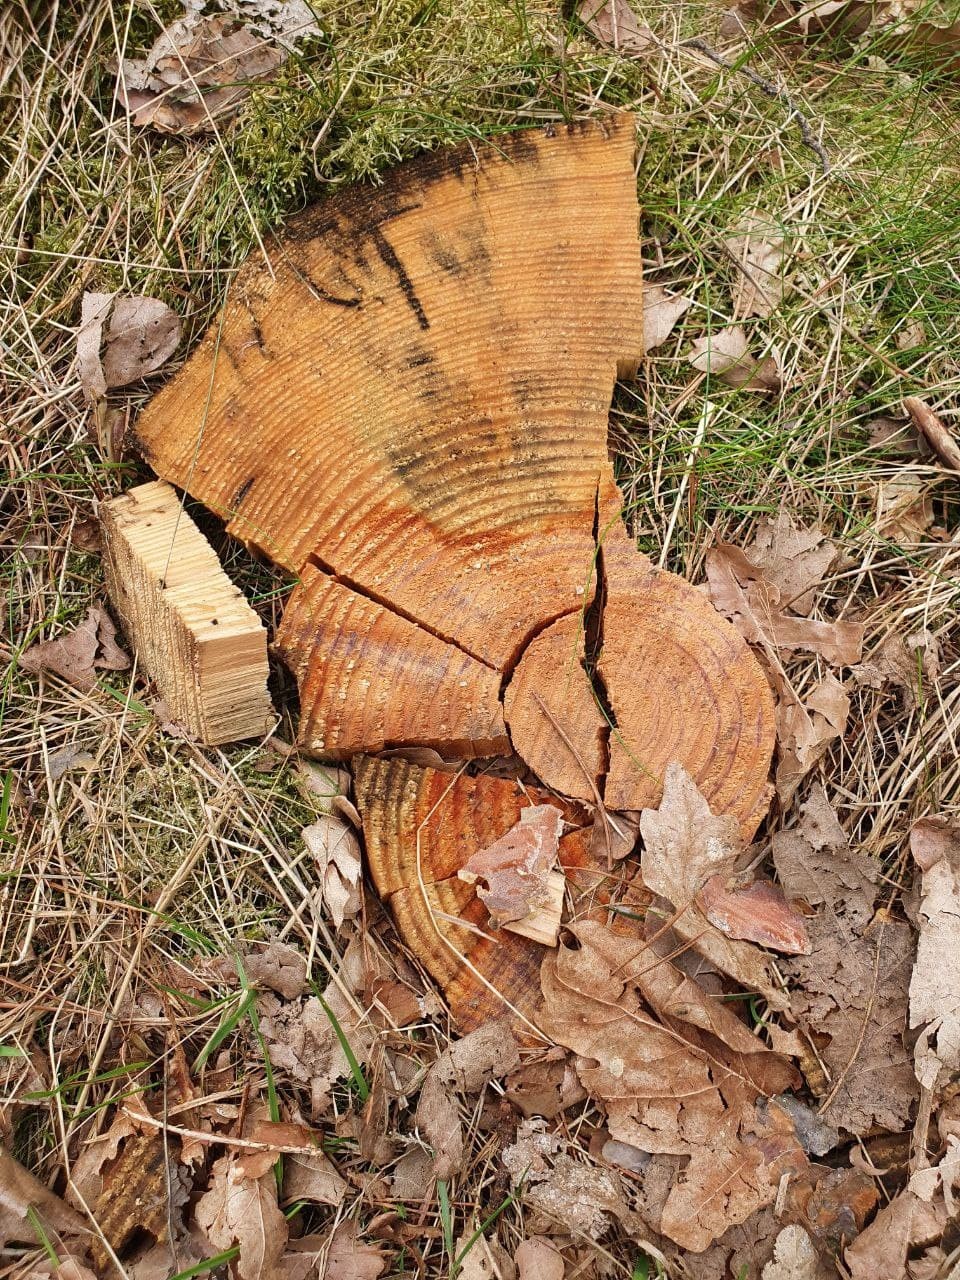 Pieces of a tree cut laying on the ground